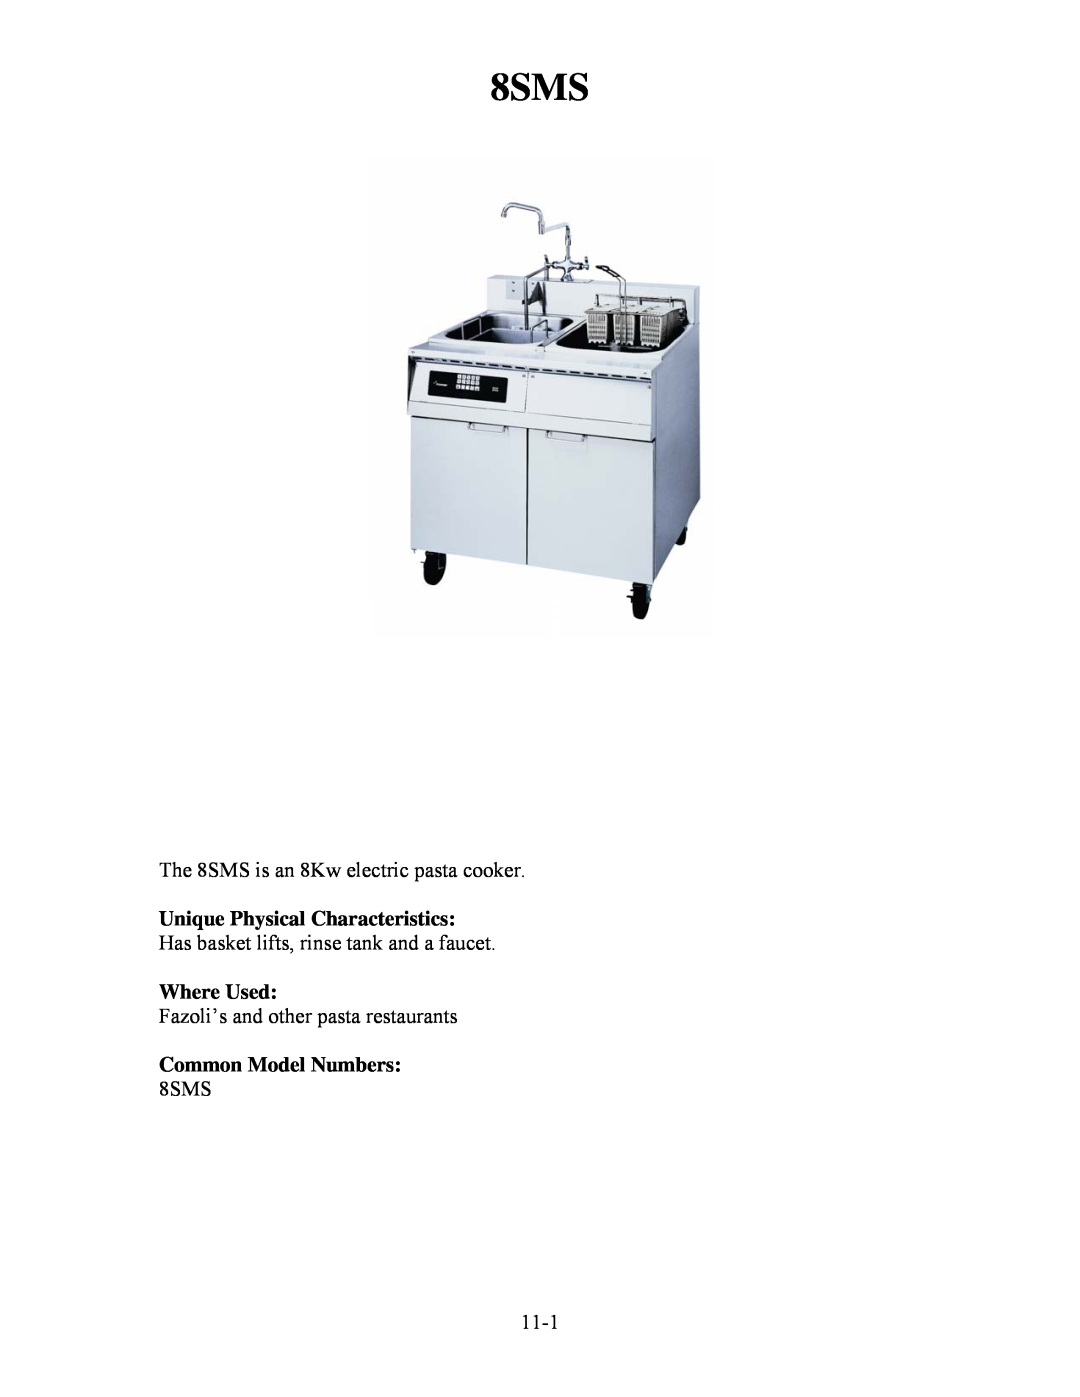 Frymaster H50 manual The 8SMS is an 8Kw electric pasta cooker, Fazoli’s and other pasta restaurants, 11-1, Where Used 